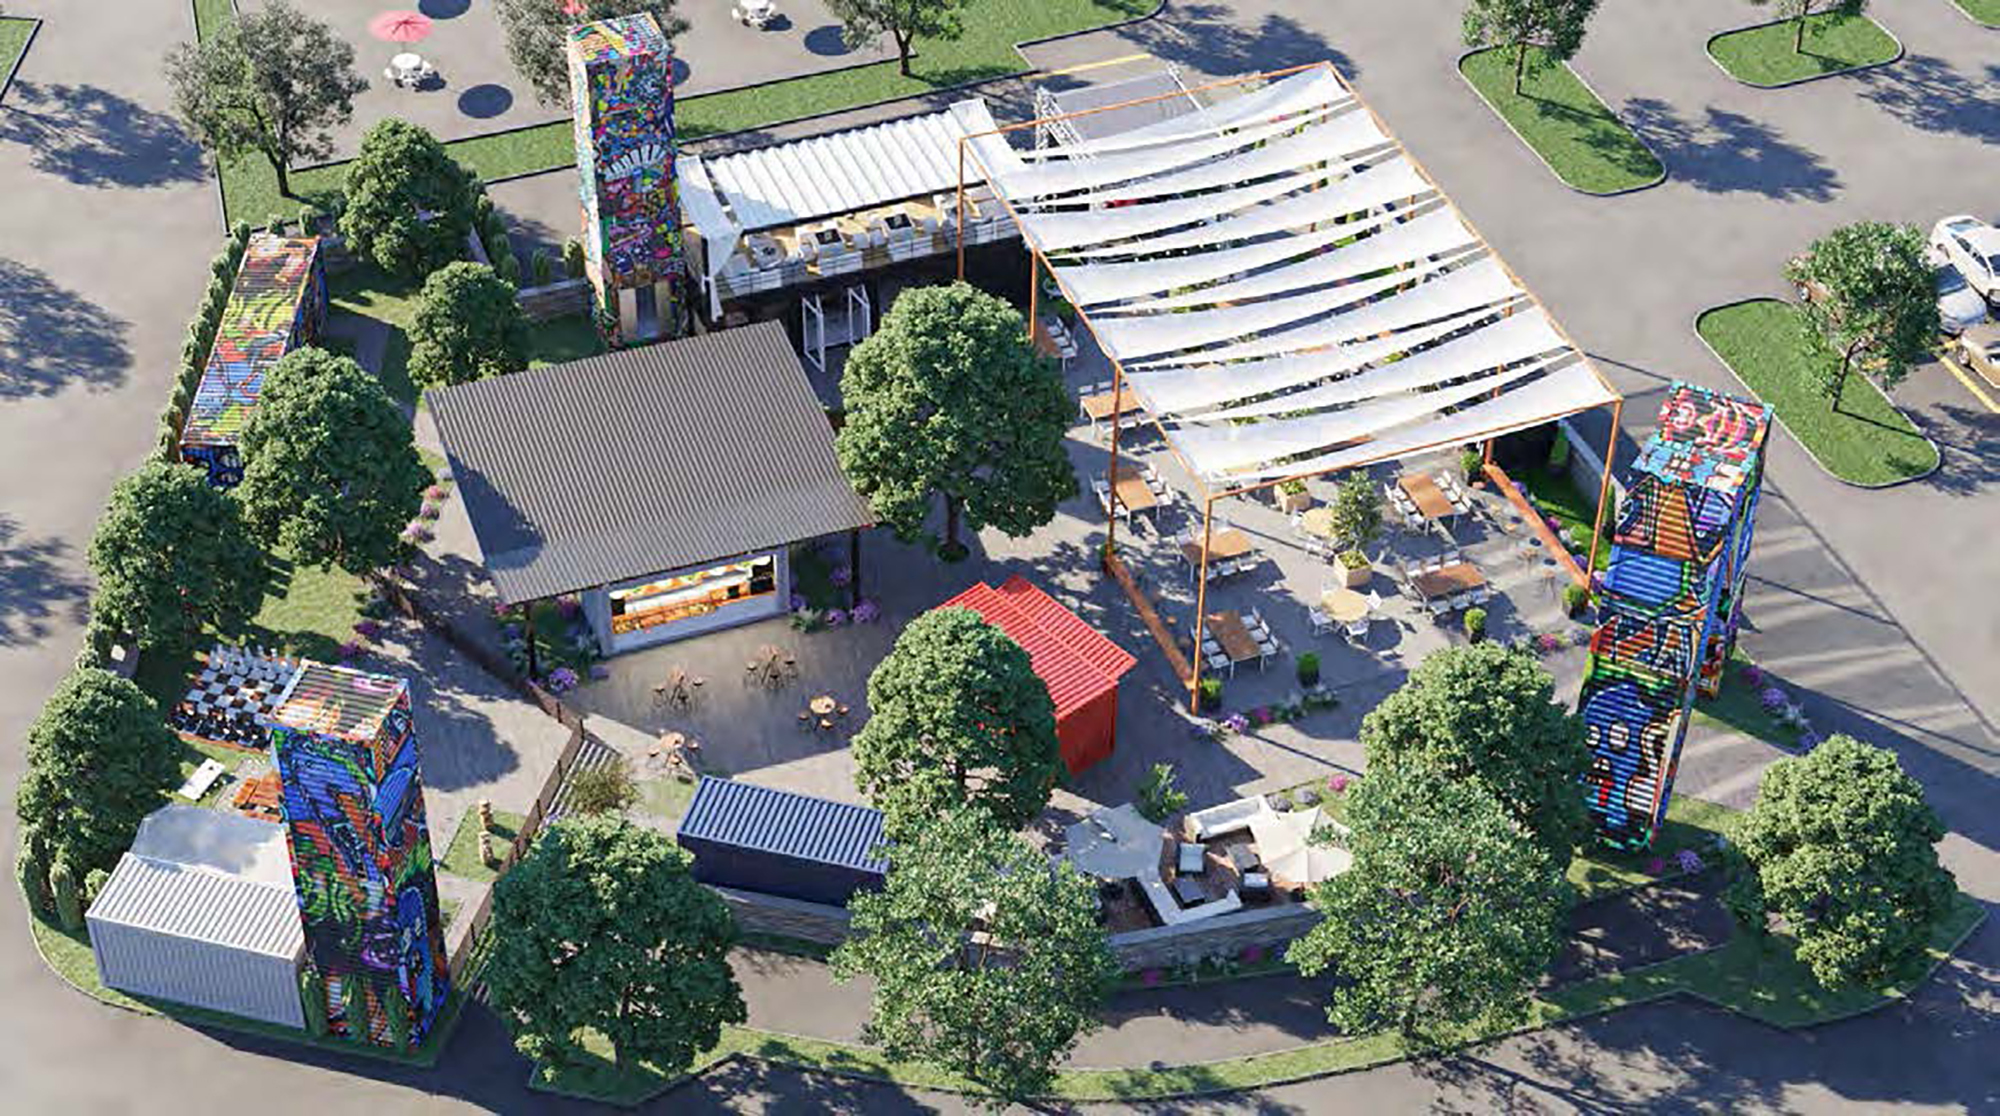 The shipping container food court area planned at College Park.